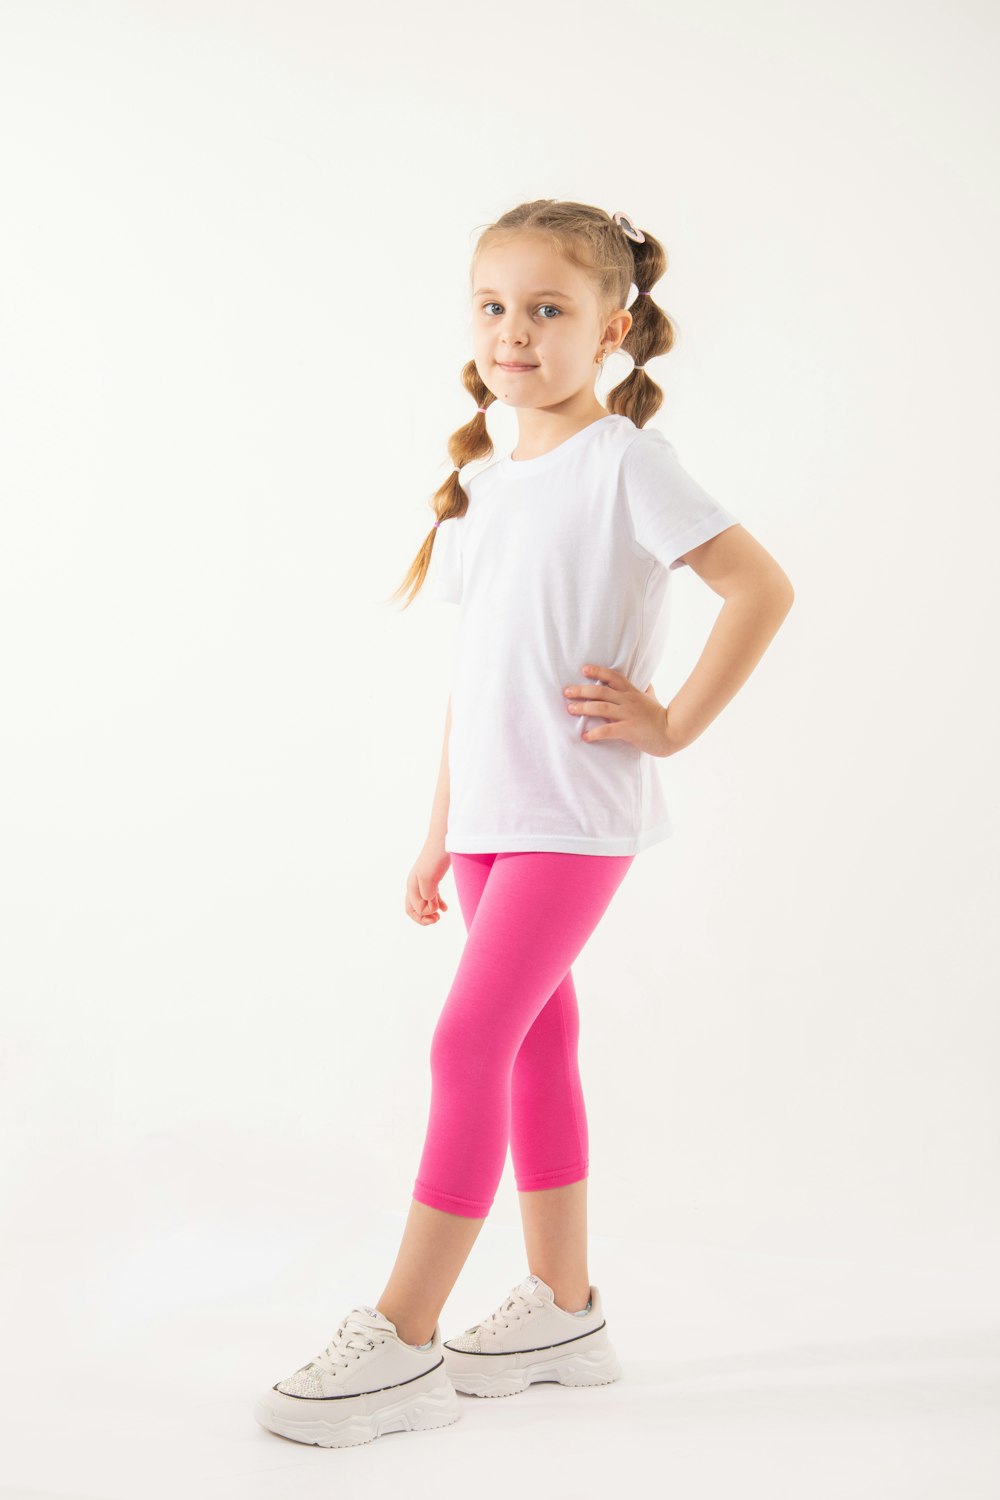 a little girl in a white shirt and pink leggings